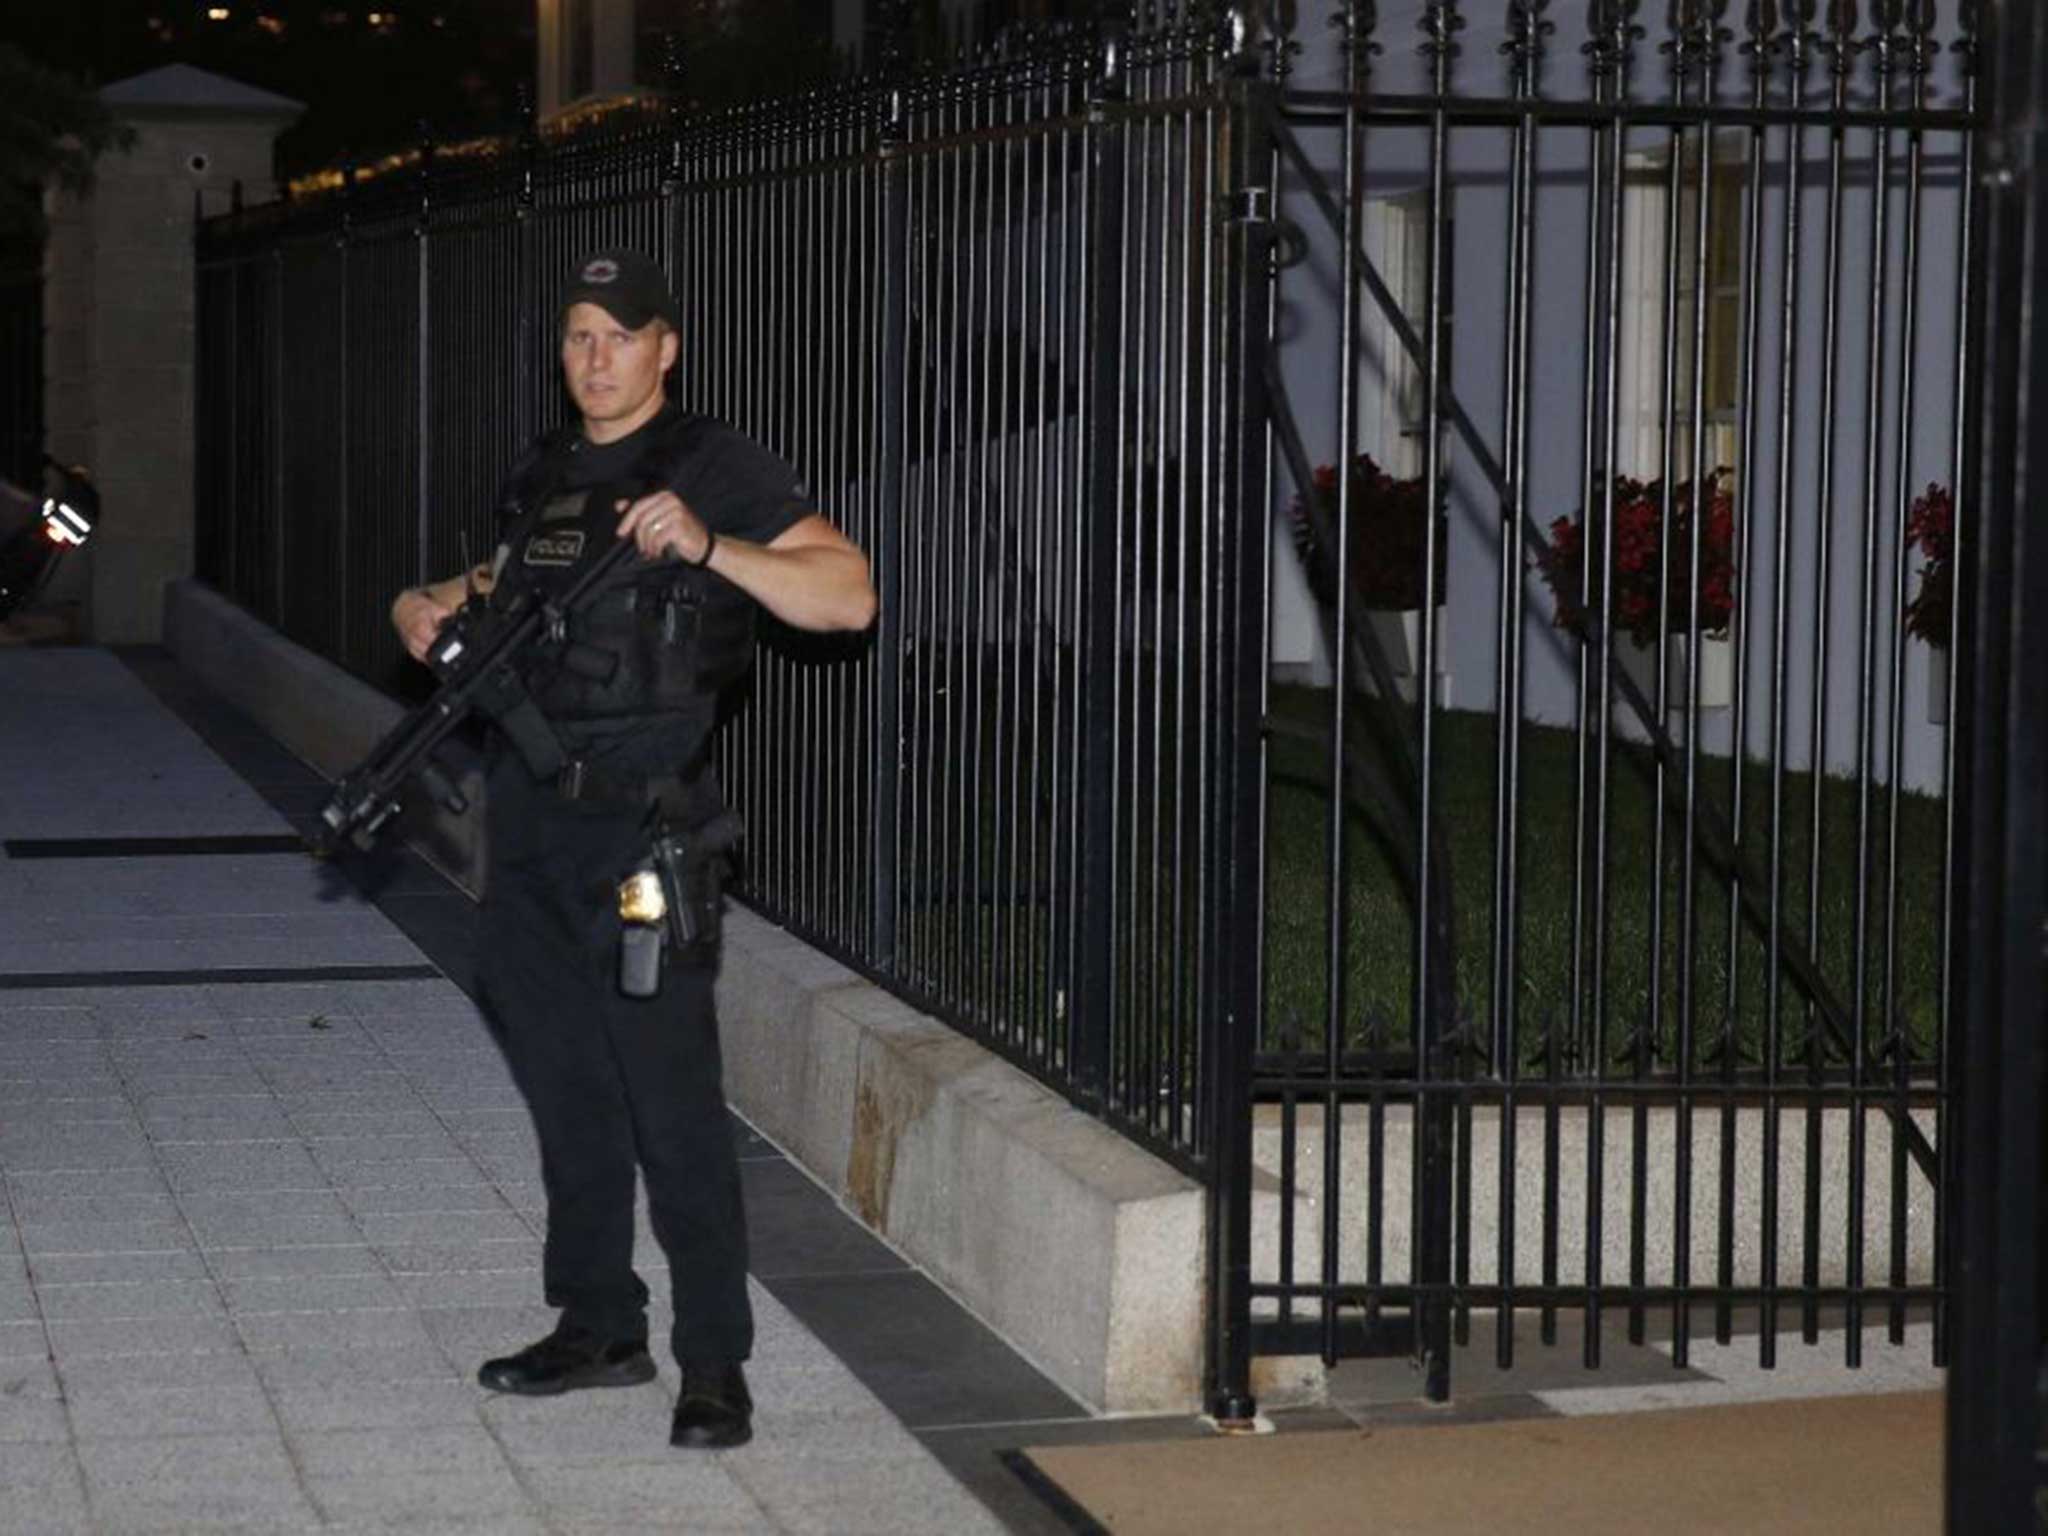 A heavily armed officer outside the White House